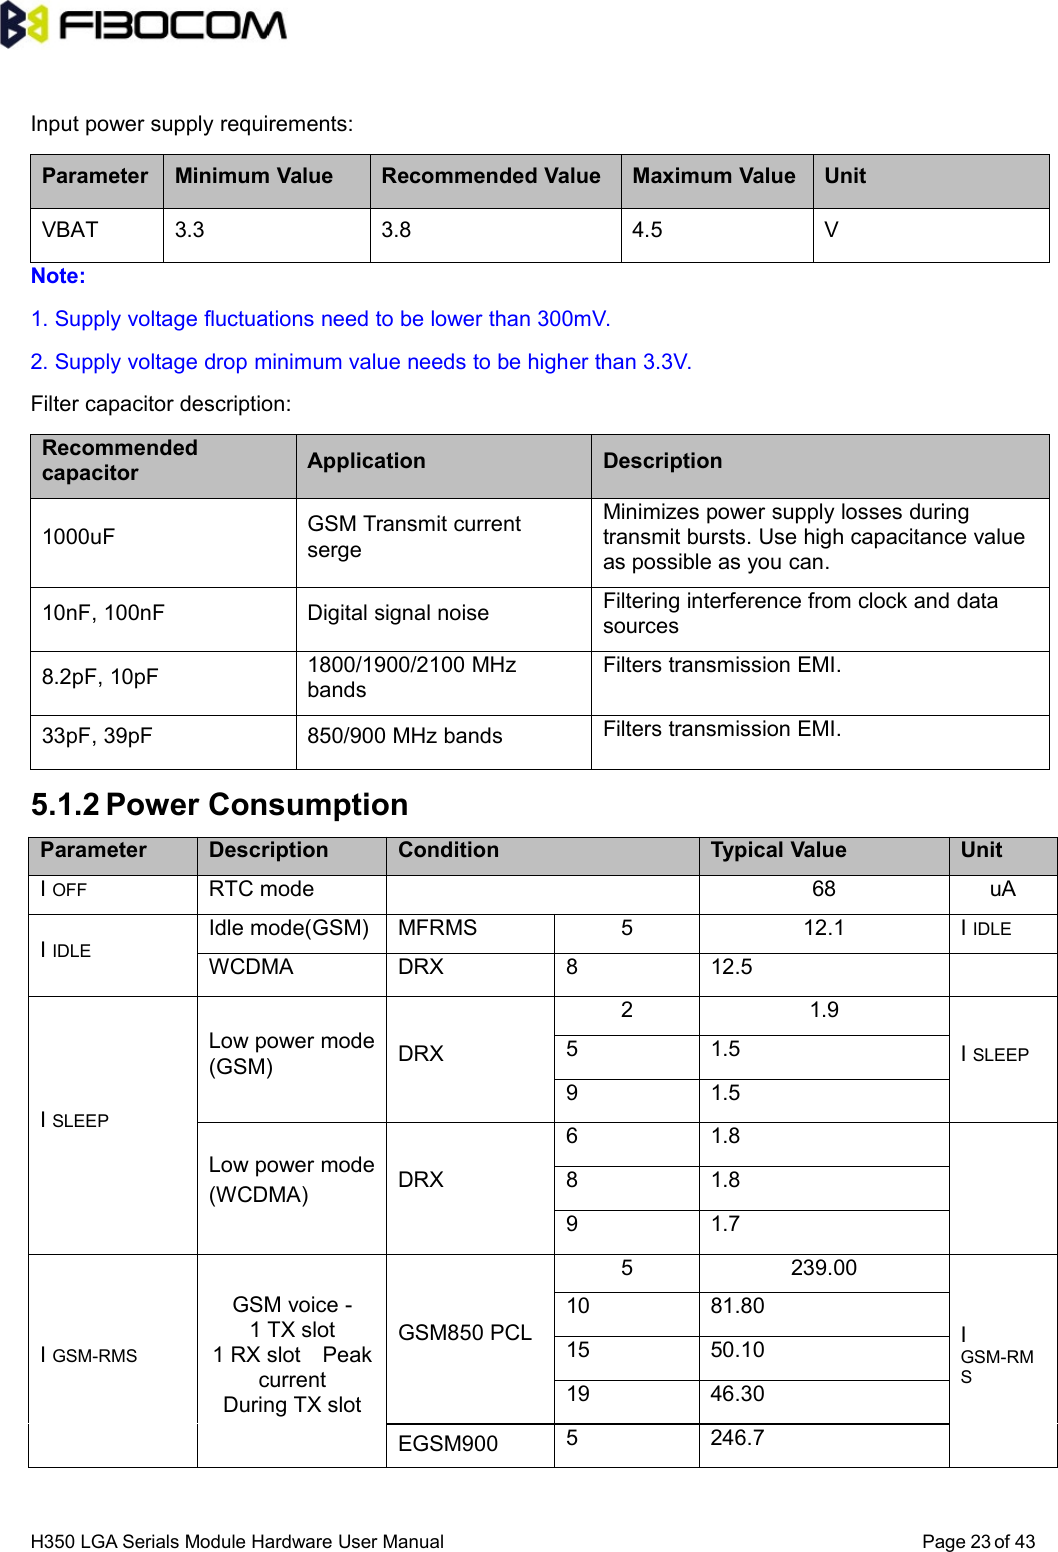 H350 LGA Serials Module Hardware User Manual Page of 4323Input power supply requirements:Parameter Minimum Value Recommended Value Maximum Value UnitVBAT 3.3 3.8 4.5 VNote:1. Supply voltage fluctuations need to be lower than 300mV.2. Supply voltage drop minimum value needs to be higher than 3.3V.Filter capacitor description:Recommendedcapacitor Application Description1000uF GSM Transmit currentsergeMinimizes power supply losses duringtransmit bursts. Use high capacitance valueas possible as you can.10nF, 100nF Digital signal noiseFiltering interference from clock and datasources8.2pF, 10pF 1800/1900/2100 MHzbandsFilters transmission EMI.33pF, 39pF 850/900 MHz bands Filters transmission EMI.5.1.2 Power ConsumptionParameter Description Condition Typical Value UnitIOFF RTC mode 68 uAIIDLEIdle mode(GSM) MFRMS 5 12.1 I IDLEWCDMA DRX 8 12.5ISLEEPLow power mode(GSM)DRX2 1.9ISLEEP5 1.59 1.5Low power mode(WCDMA)DRX6 1.88 1.89 1.7IGSM-RMSGSM voice -1 TX slot1 RX slot PeakcurrentDuring TX slotGSM850 PCL5 239.00IGSM-RMS10 81.8015 50.1019 46.30EGSM900 5 246.7